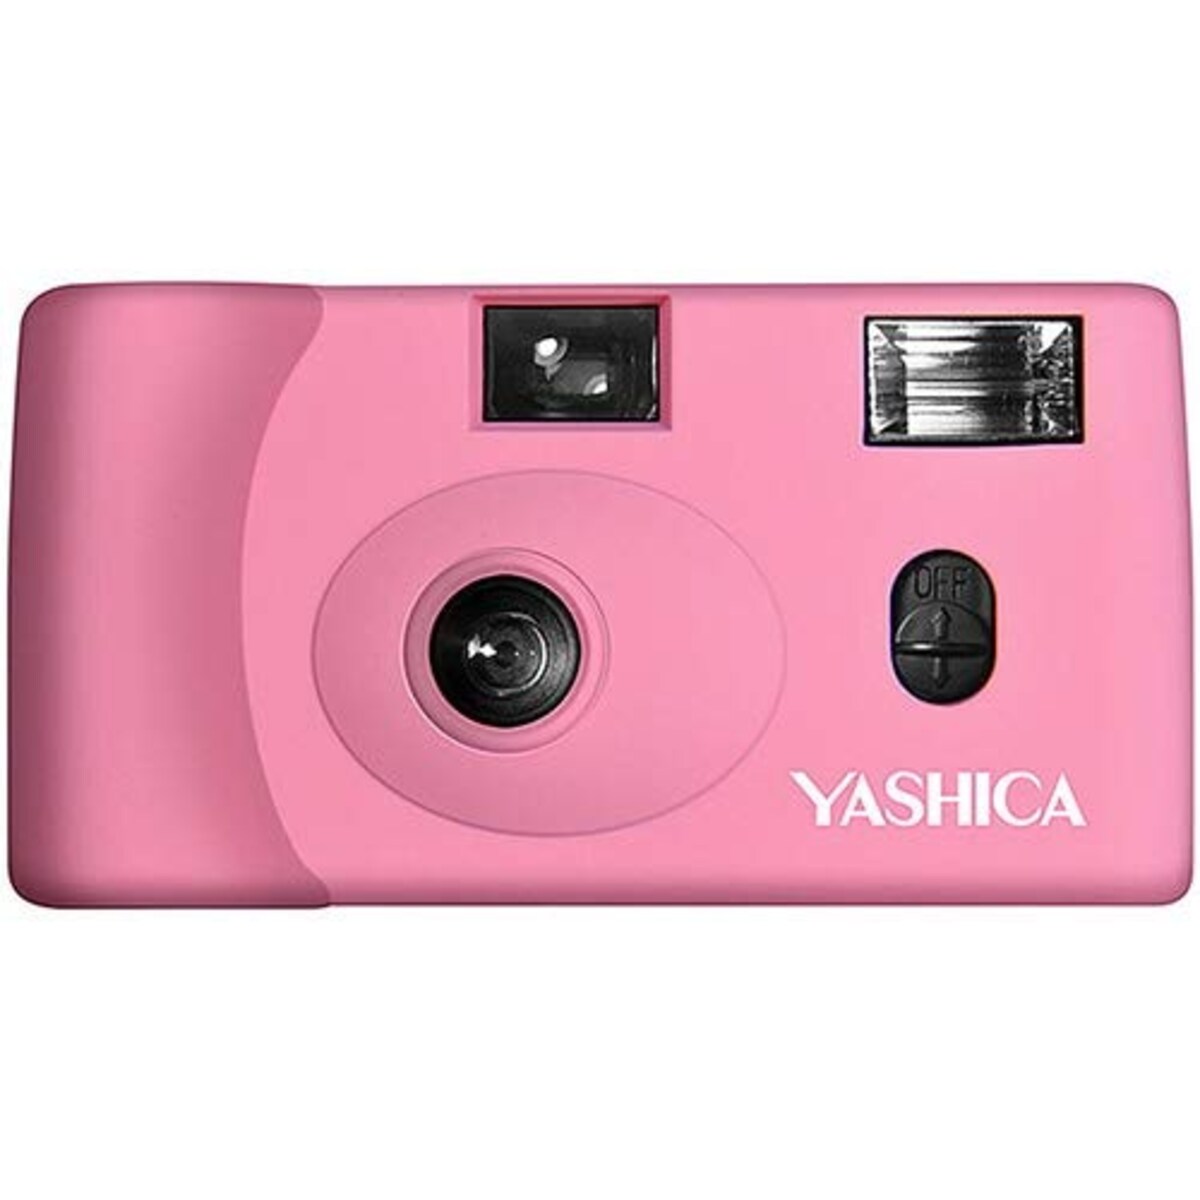 Camera Pink with Yashica 400 ピンク